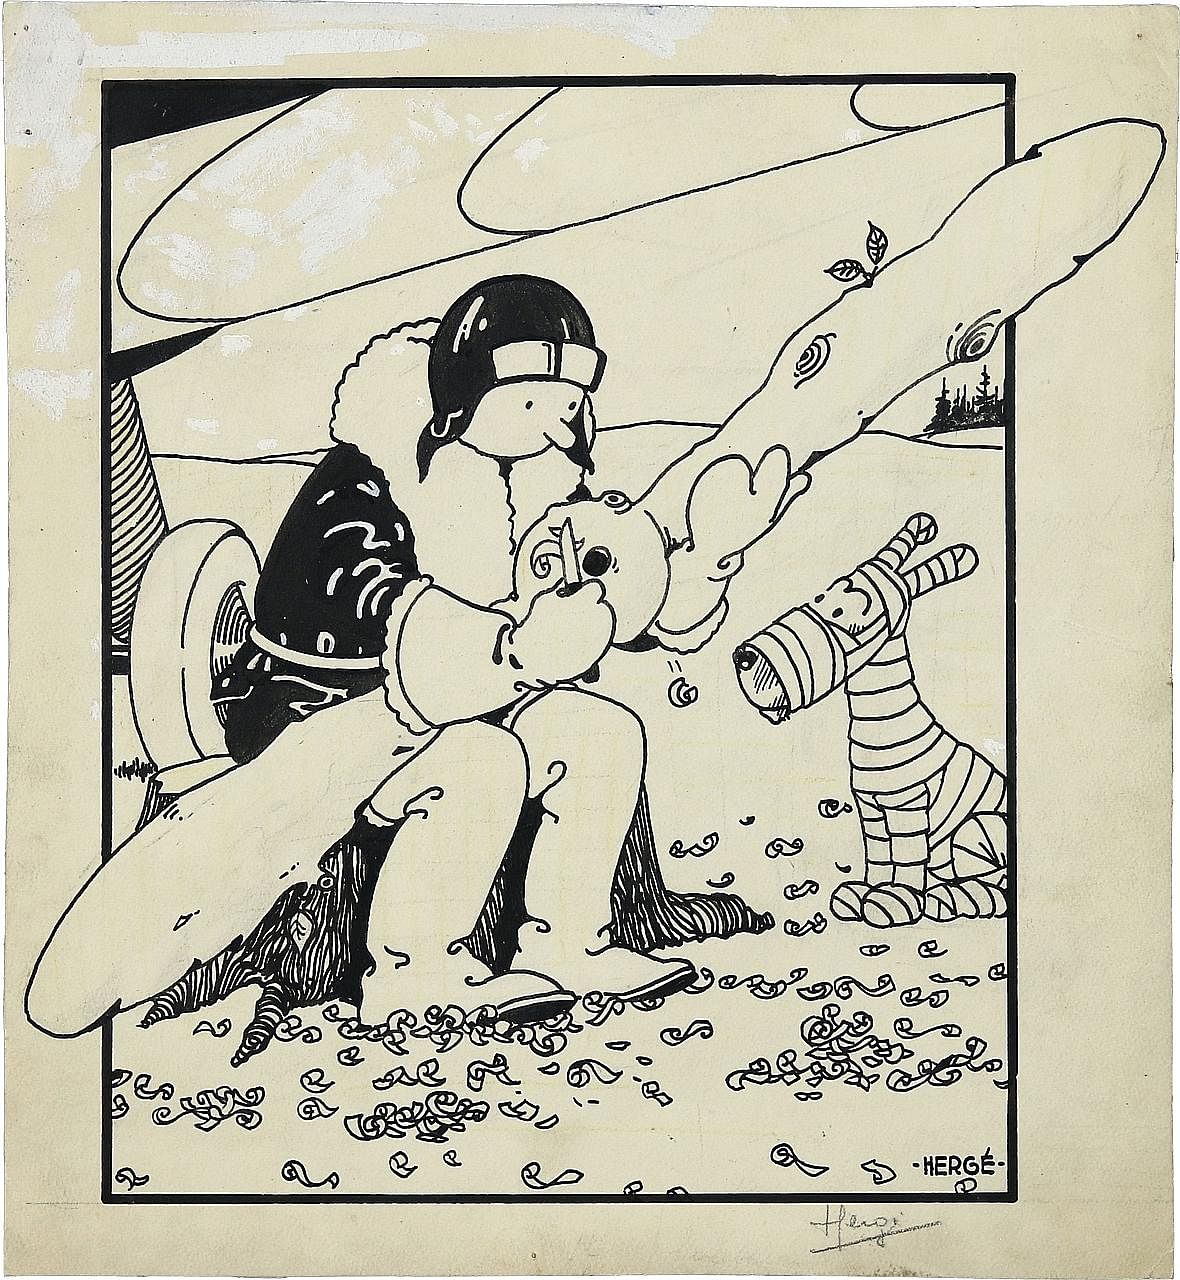 The original drawing used for the first Tintin cover in Le Petit Vingtieme on Feb 13, 1930. It was one of the "rare cover illustrations signed by (Tintin creator) Herge in private hands", according to the auction house. PHOTO: AGENCE FRANCE-PRESSE/ H